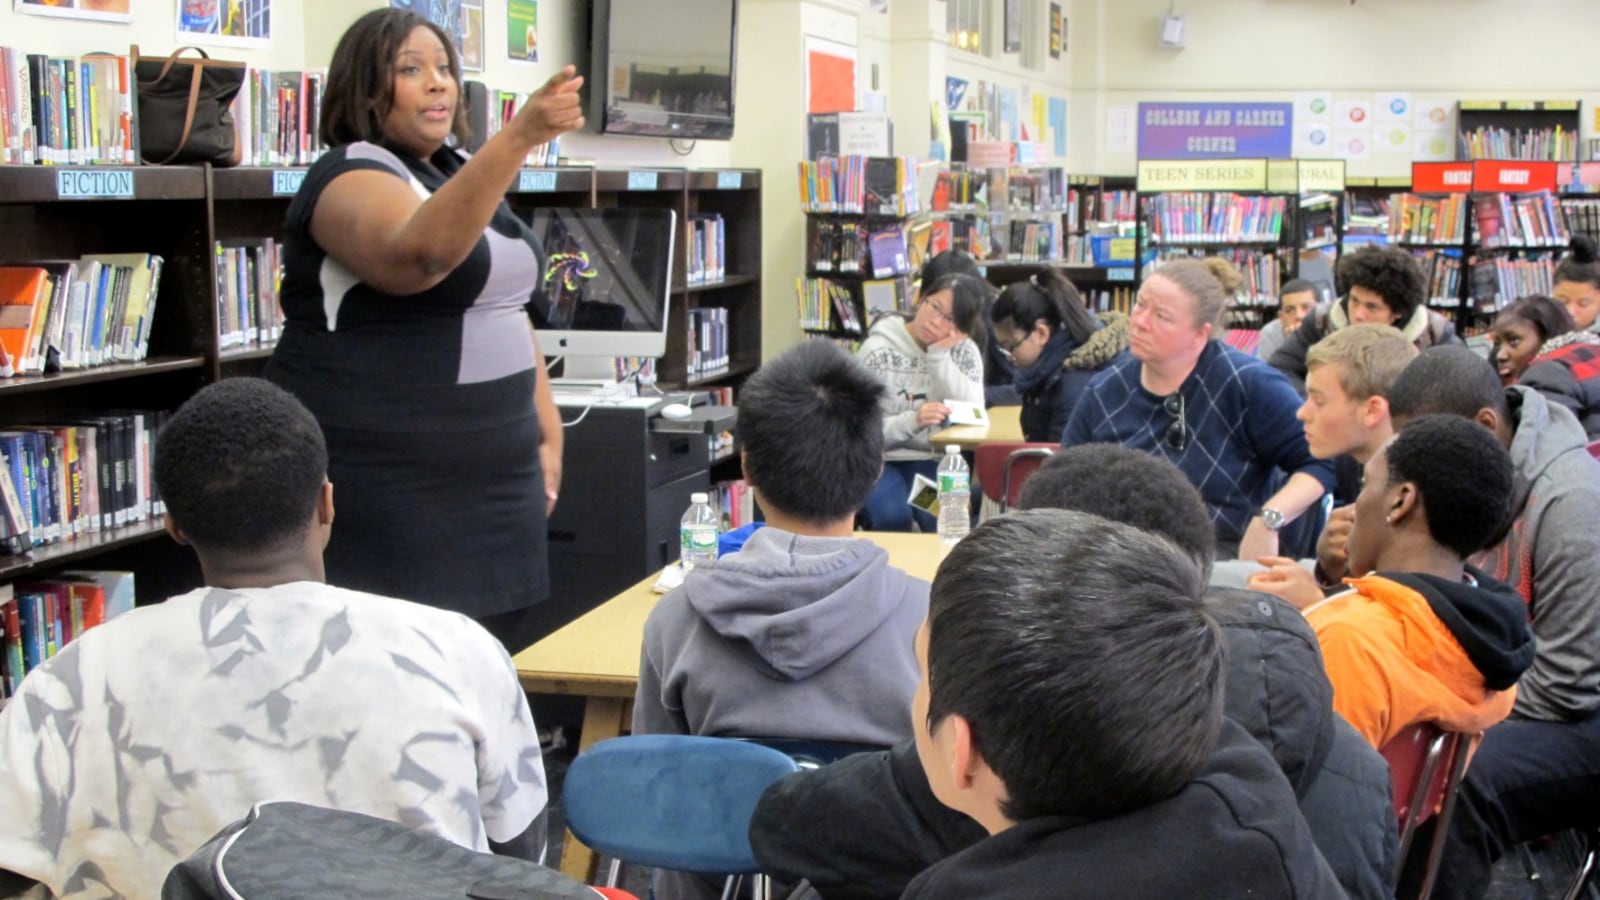 Candis Tolliver from the New York Civil Liberties Union spoke with students at East Side Community School in 2014 about how to interact with the police.